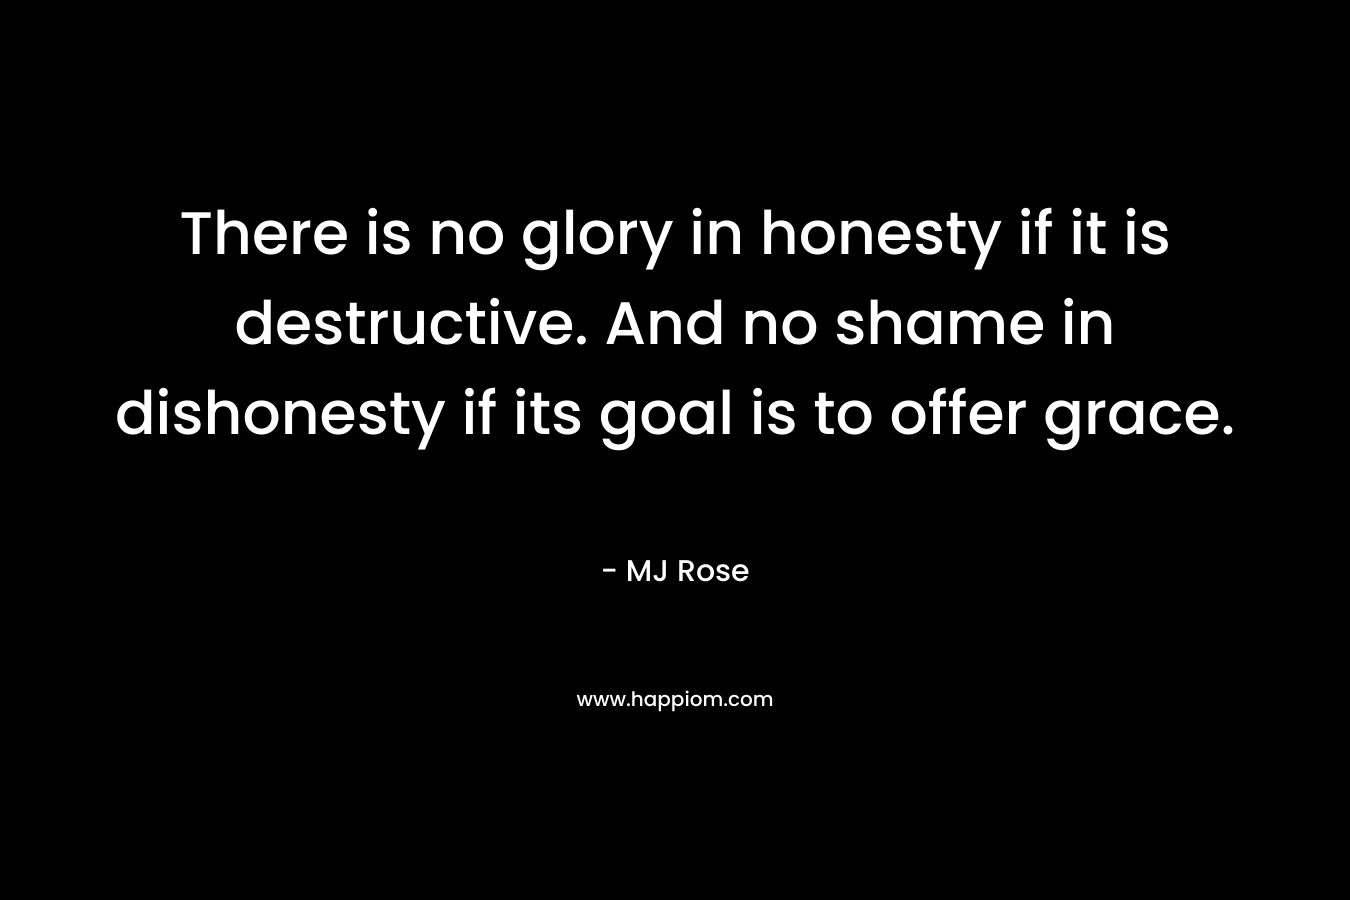 There is no glory in honesty if it is destructive. And no shame in dishonesty if its goal is to offer grace. – MJ Rose